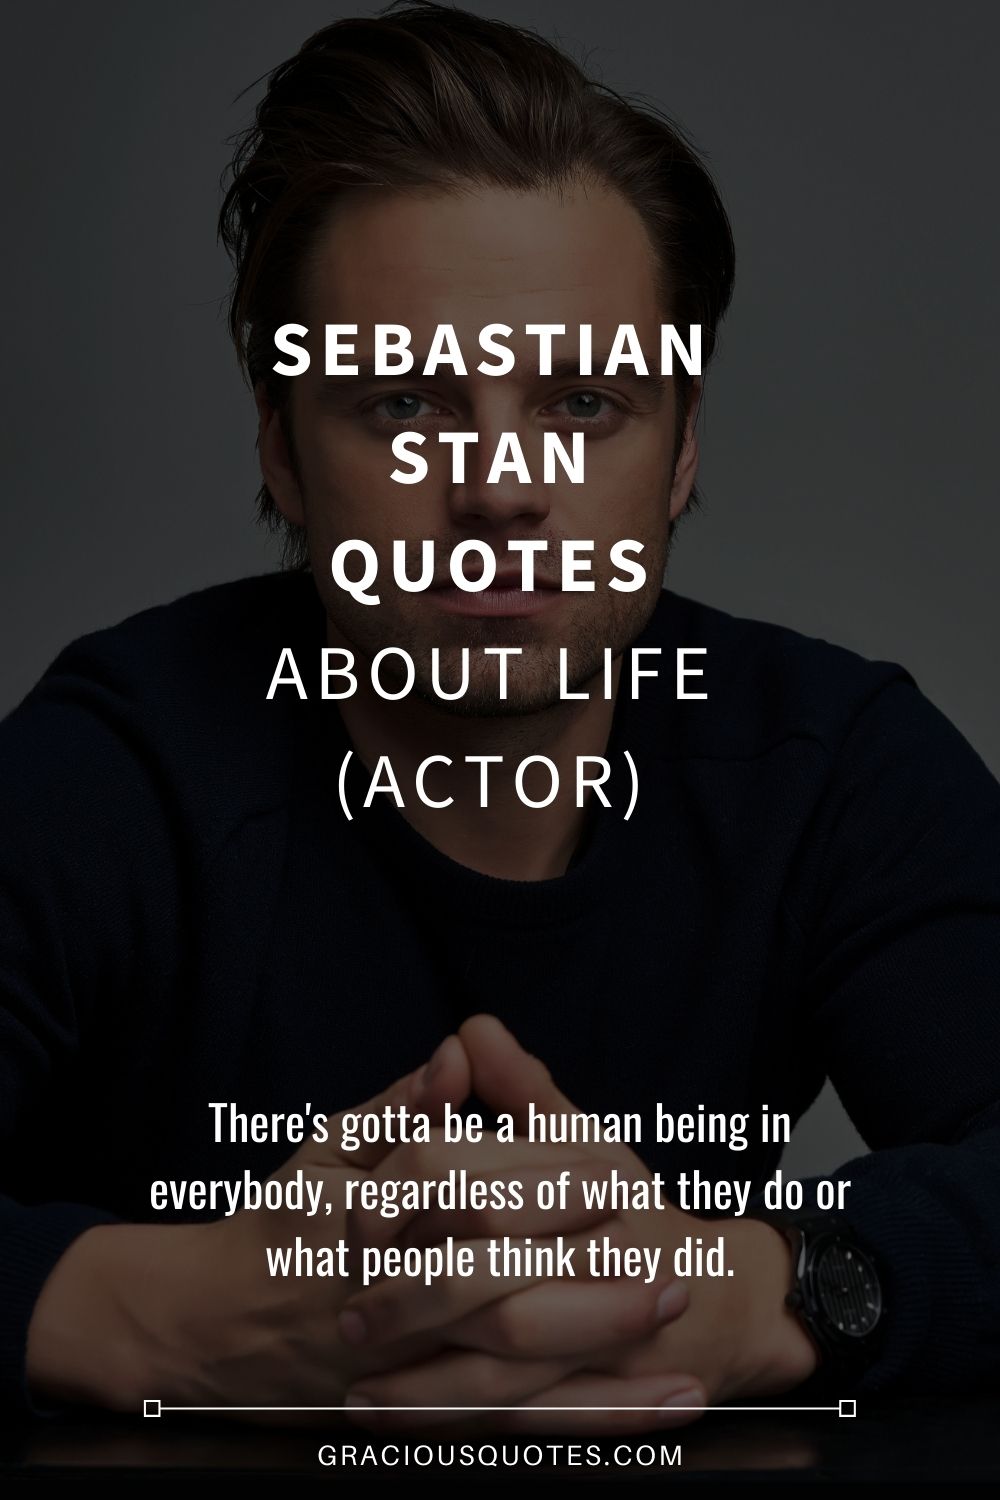 Sebastian Stan Quotes About Life (ACTOR) - Gracious Quotes